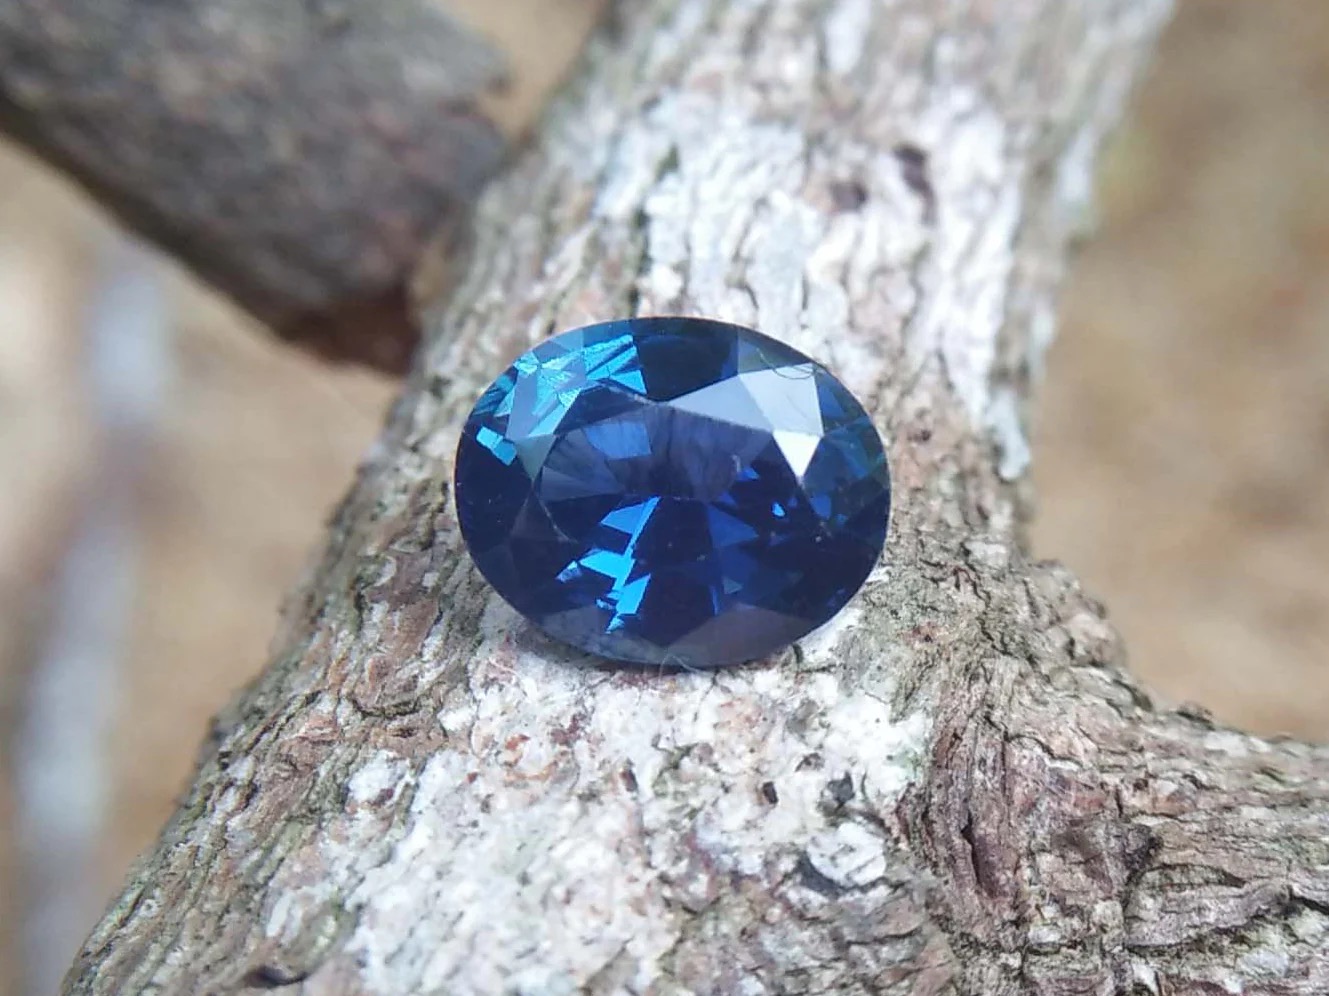 You got: Sapphire! What Gemstone Are You? 💎 Take the Quiz to Reveal Your Perfect Precious Stone!